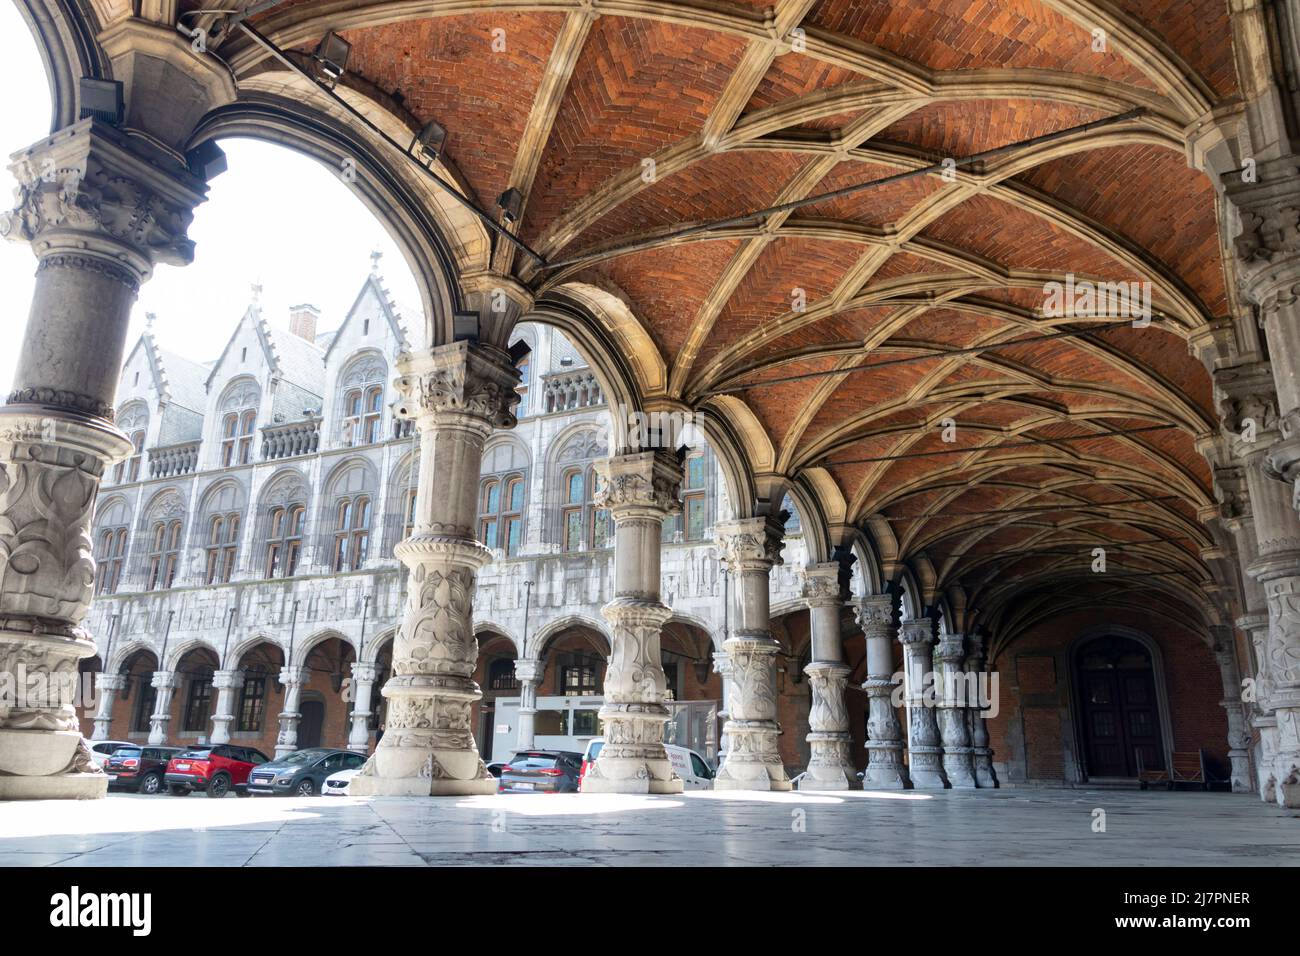 Cloister arches in courtyard of Prince-Bishops' Palace (Palais des Princes-Evêques) at Place Saint-Lambert Stock Photo